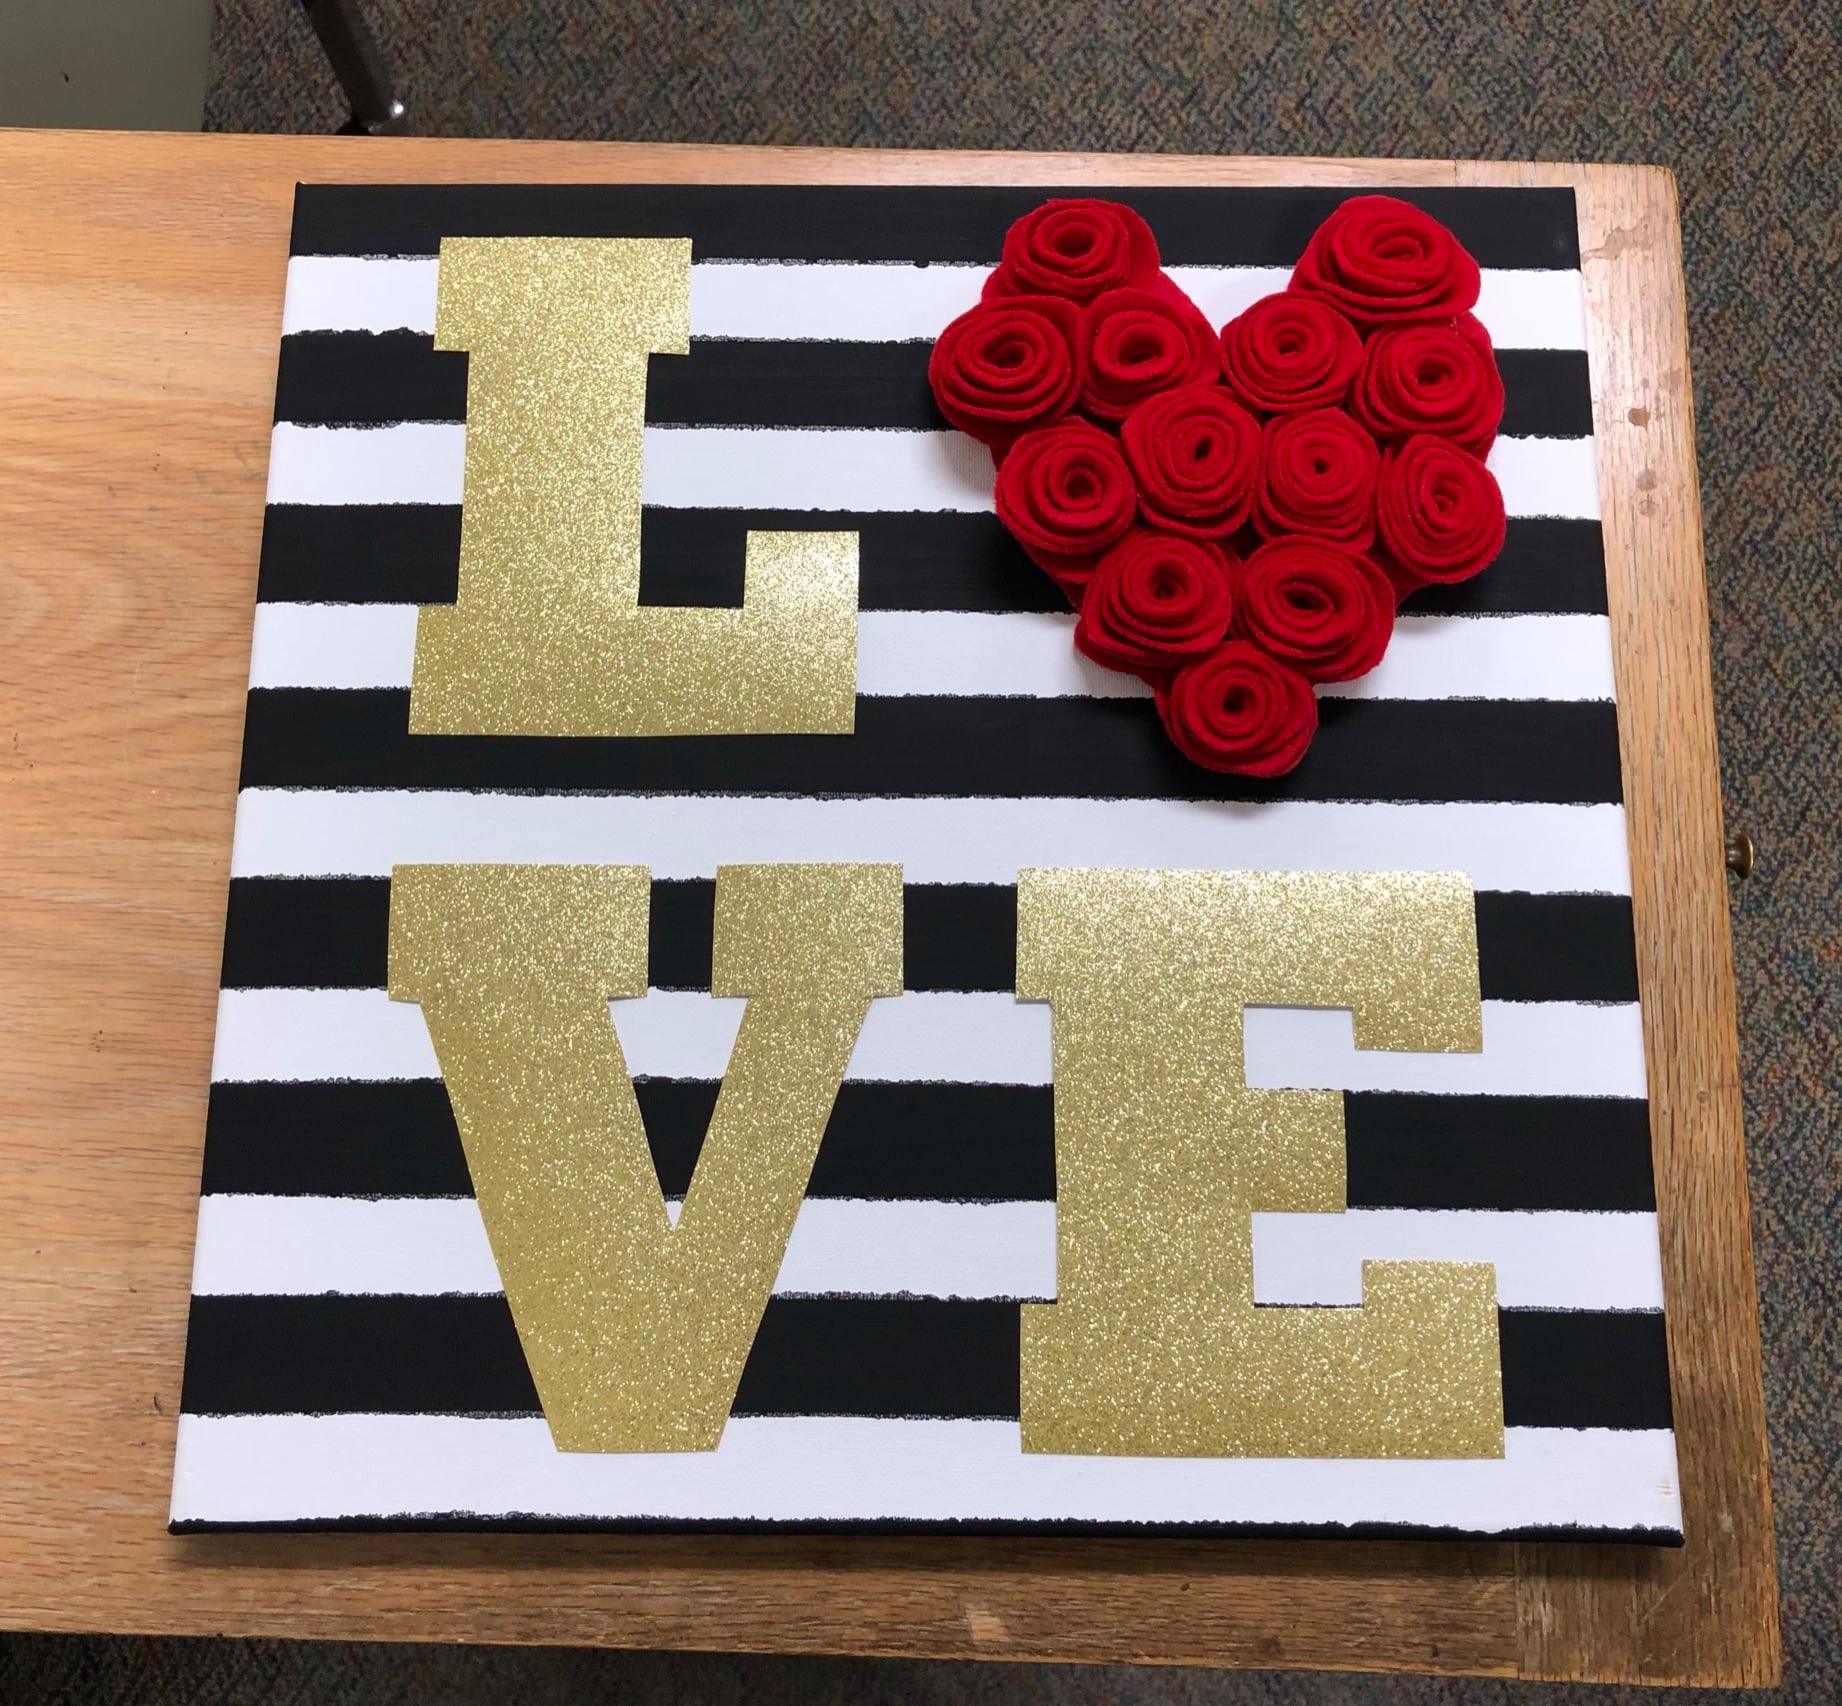 A photo of wall decor, featuring a square covered in black and white horizontal stripes. on top of that are the letters L, V and E on gold, arranged in a square. The O is a red heart.